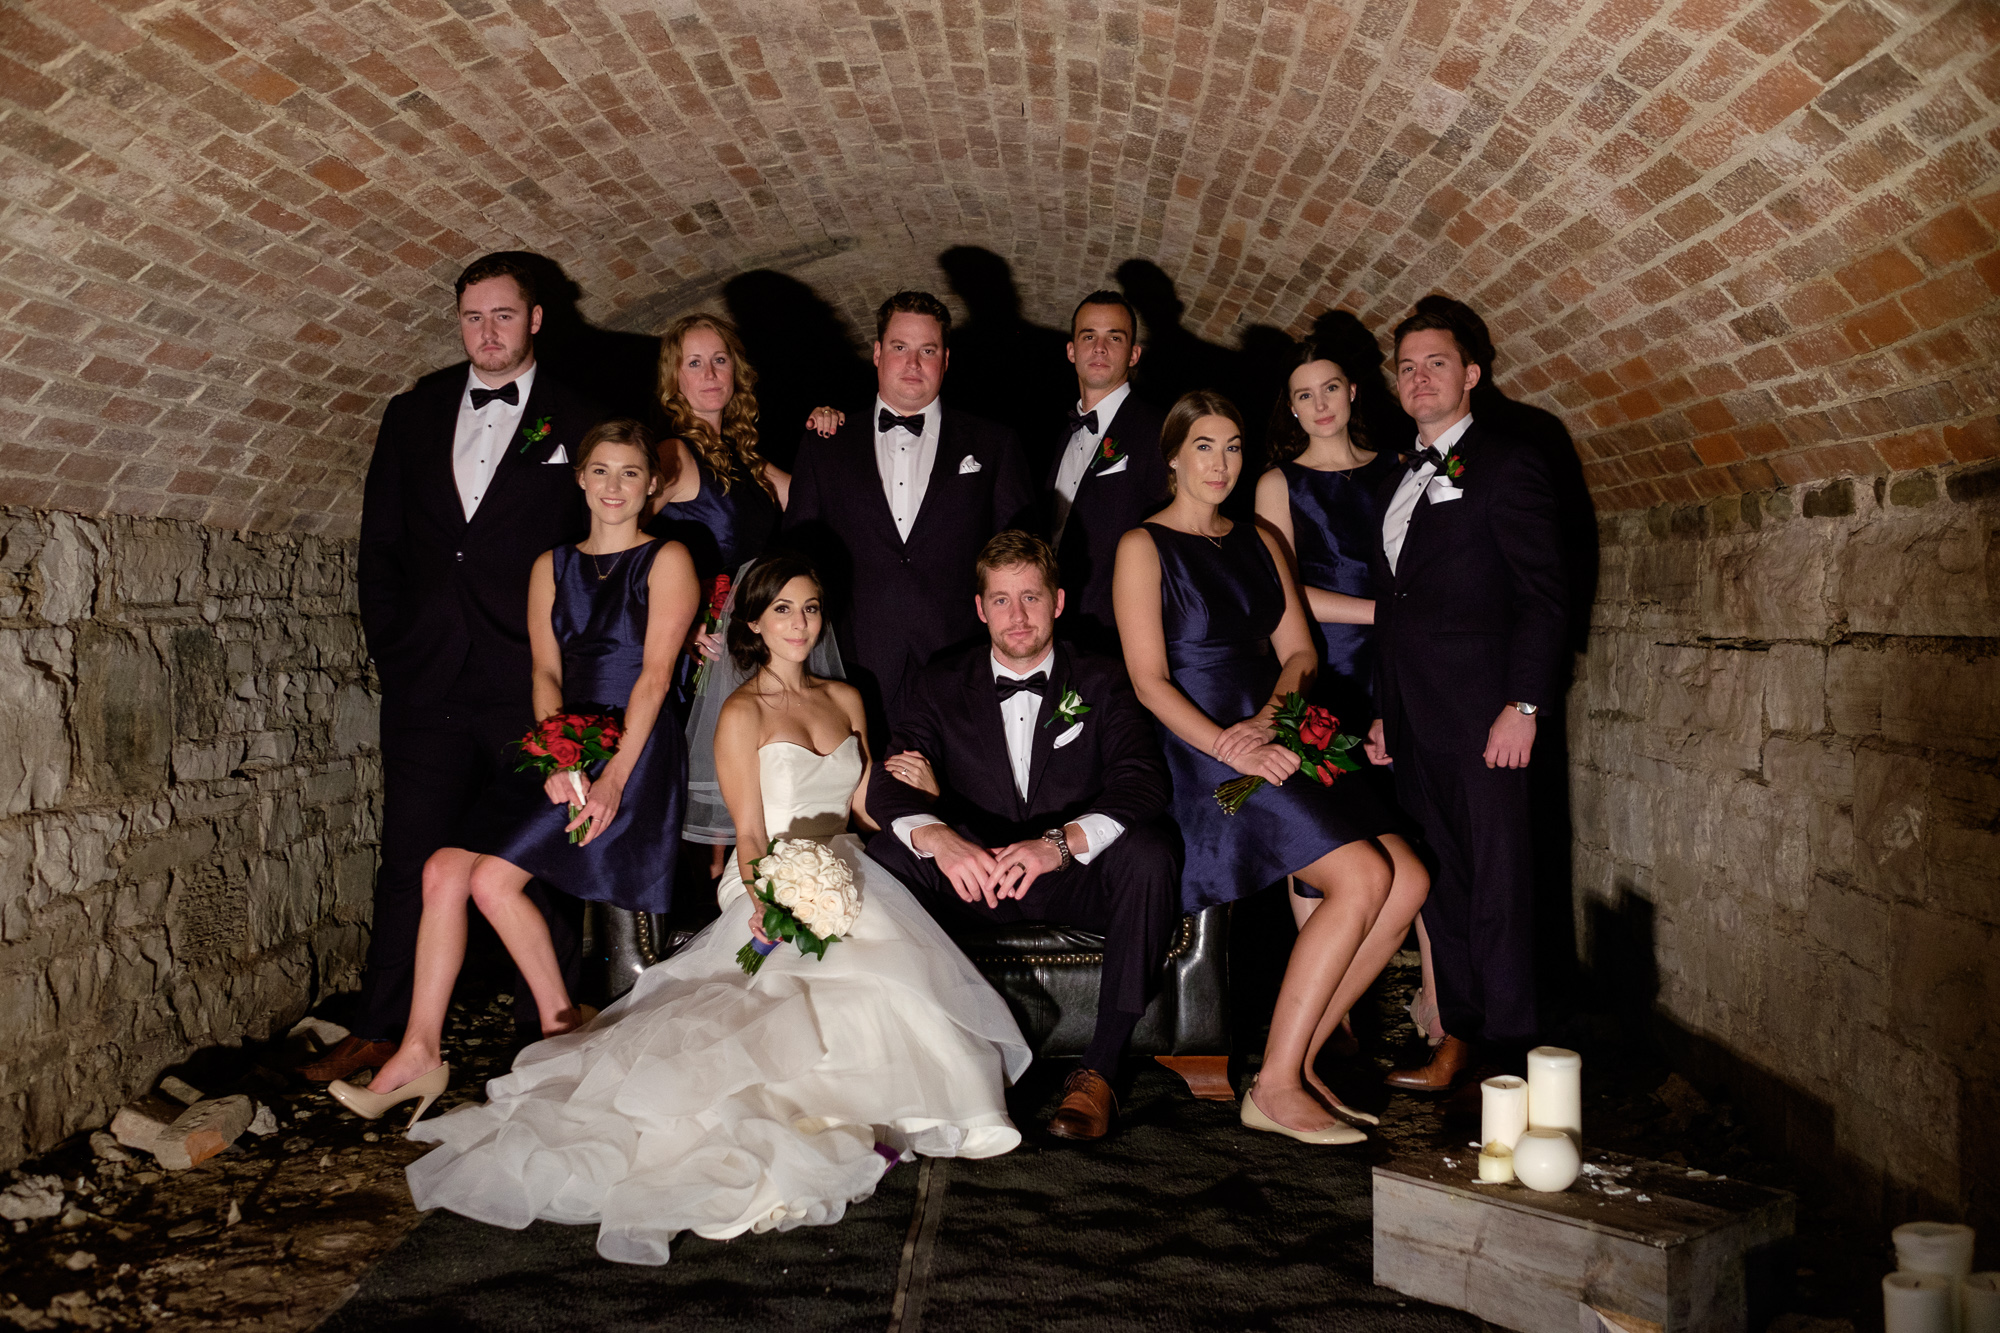  Spencer and Jonas pose with their wedding party for a cool portrait in the old bootlegger tunnels under the Stirling Room. 